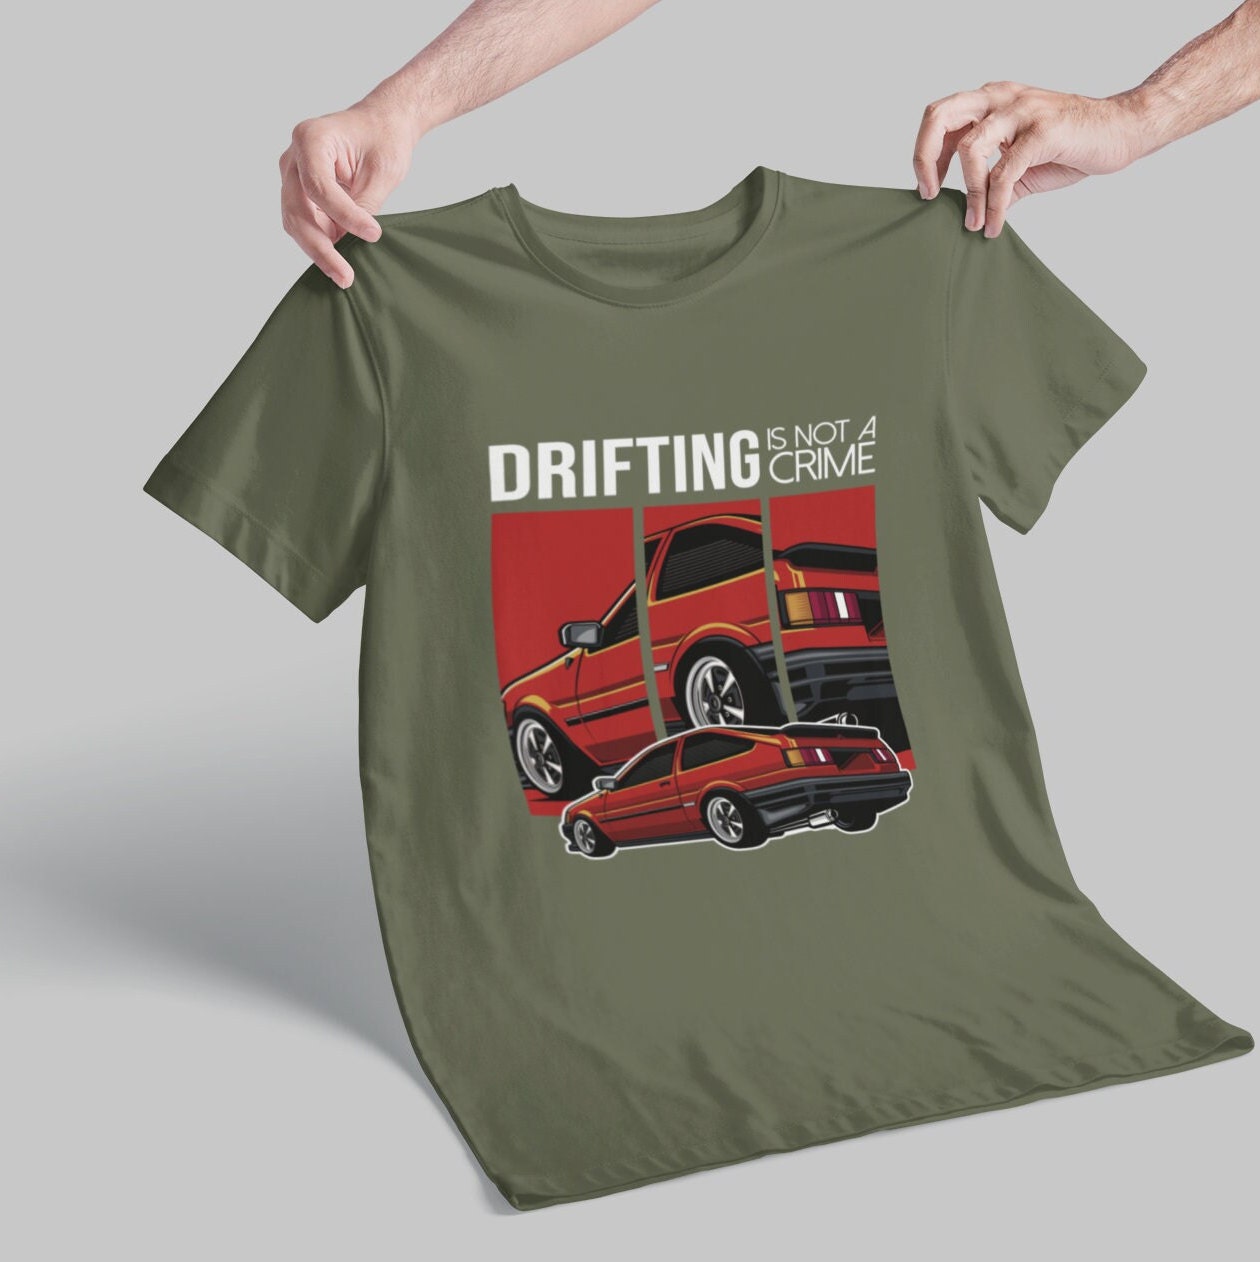 chris papazian recommends Drifting Shirt Comes Off